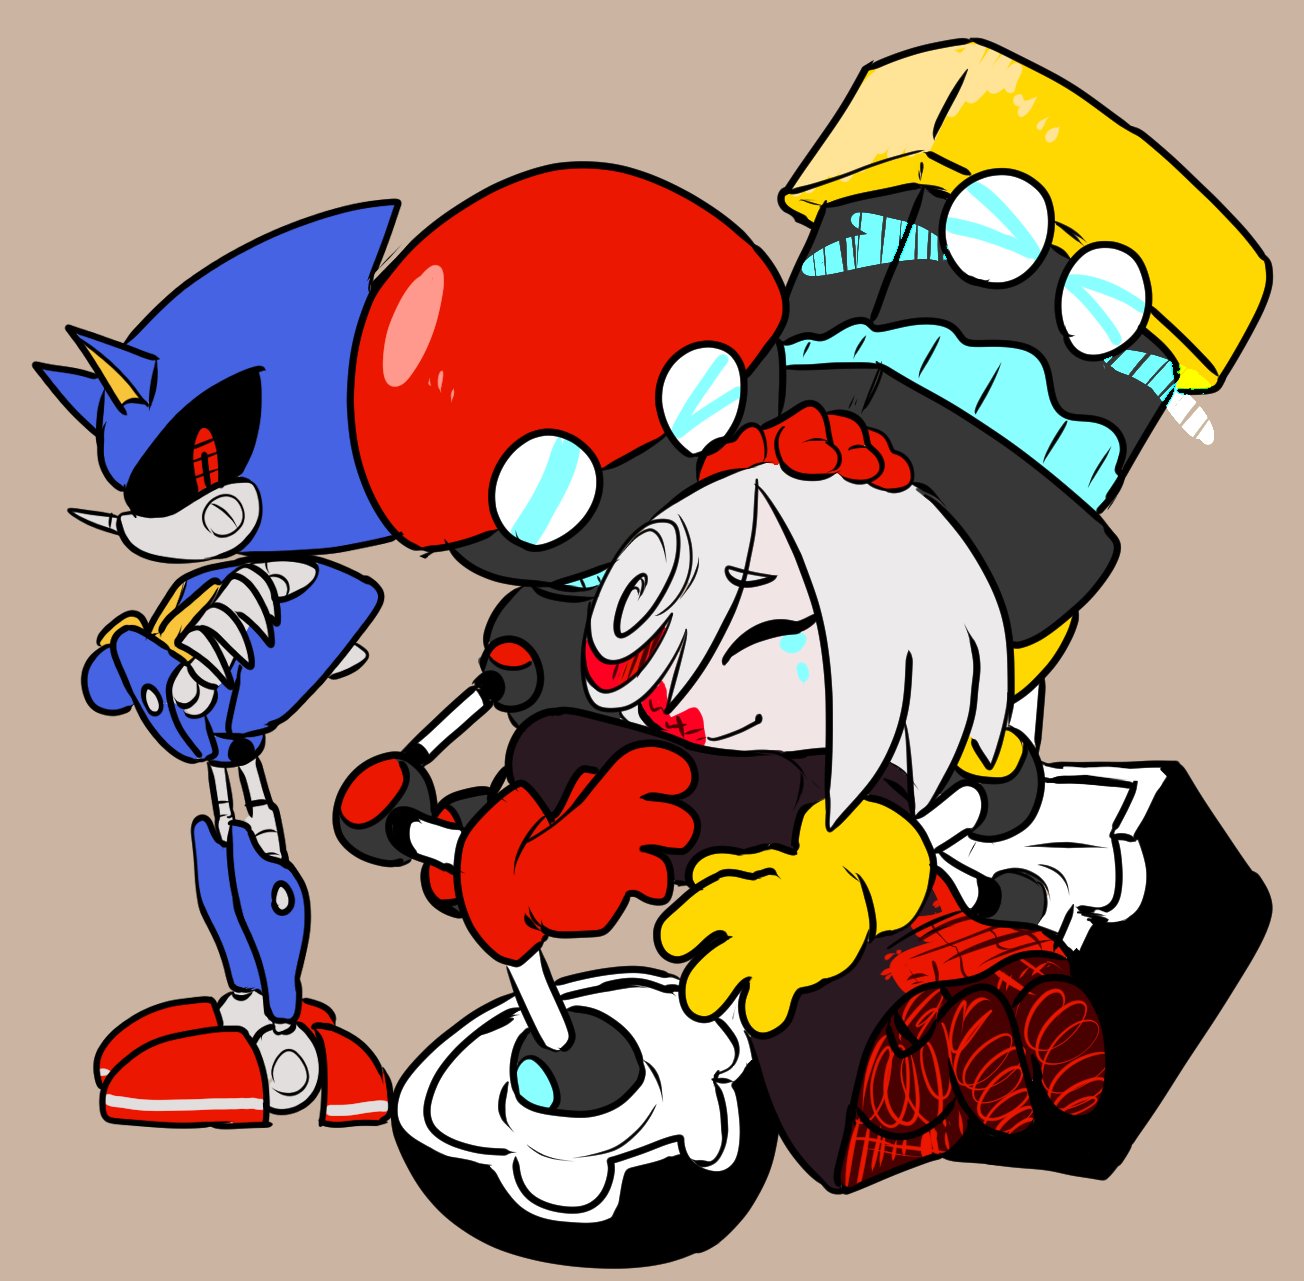 SGT-X on X: orbot and cubot of course get a hug from their new